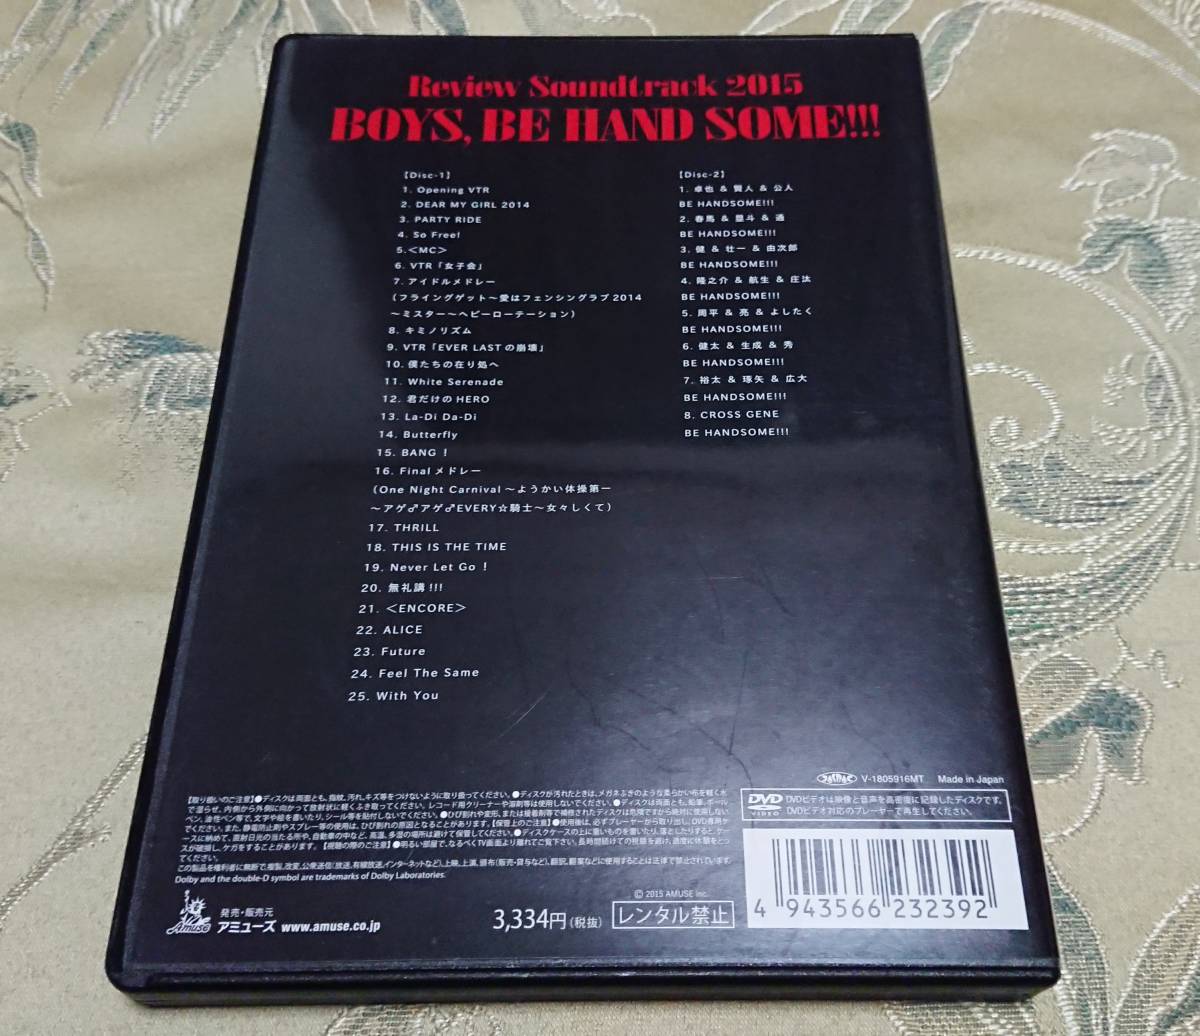 DVD 「Review Soundtrack 2015 BOYS, BE HANDSOME!!!」_画像2